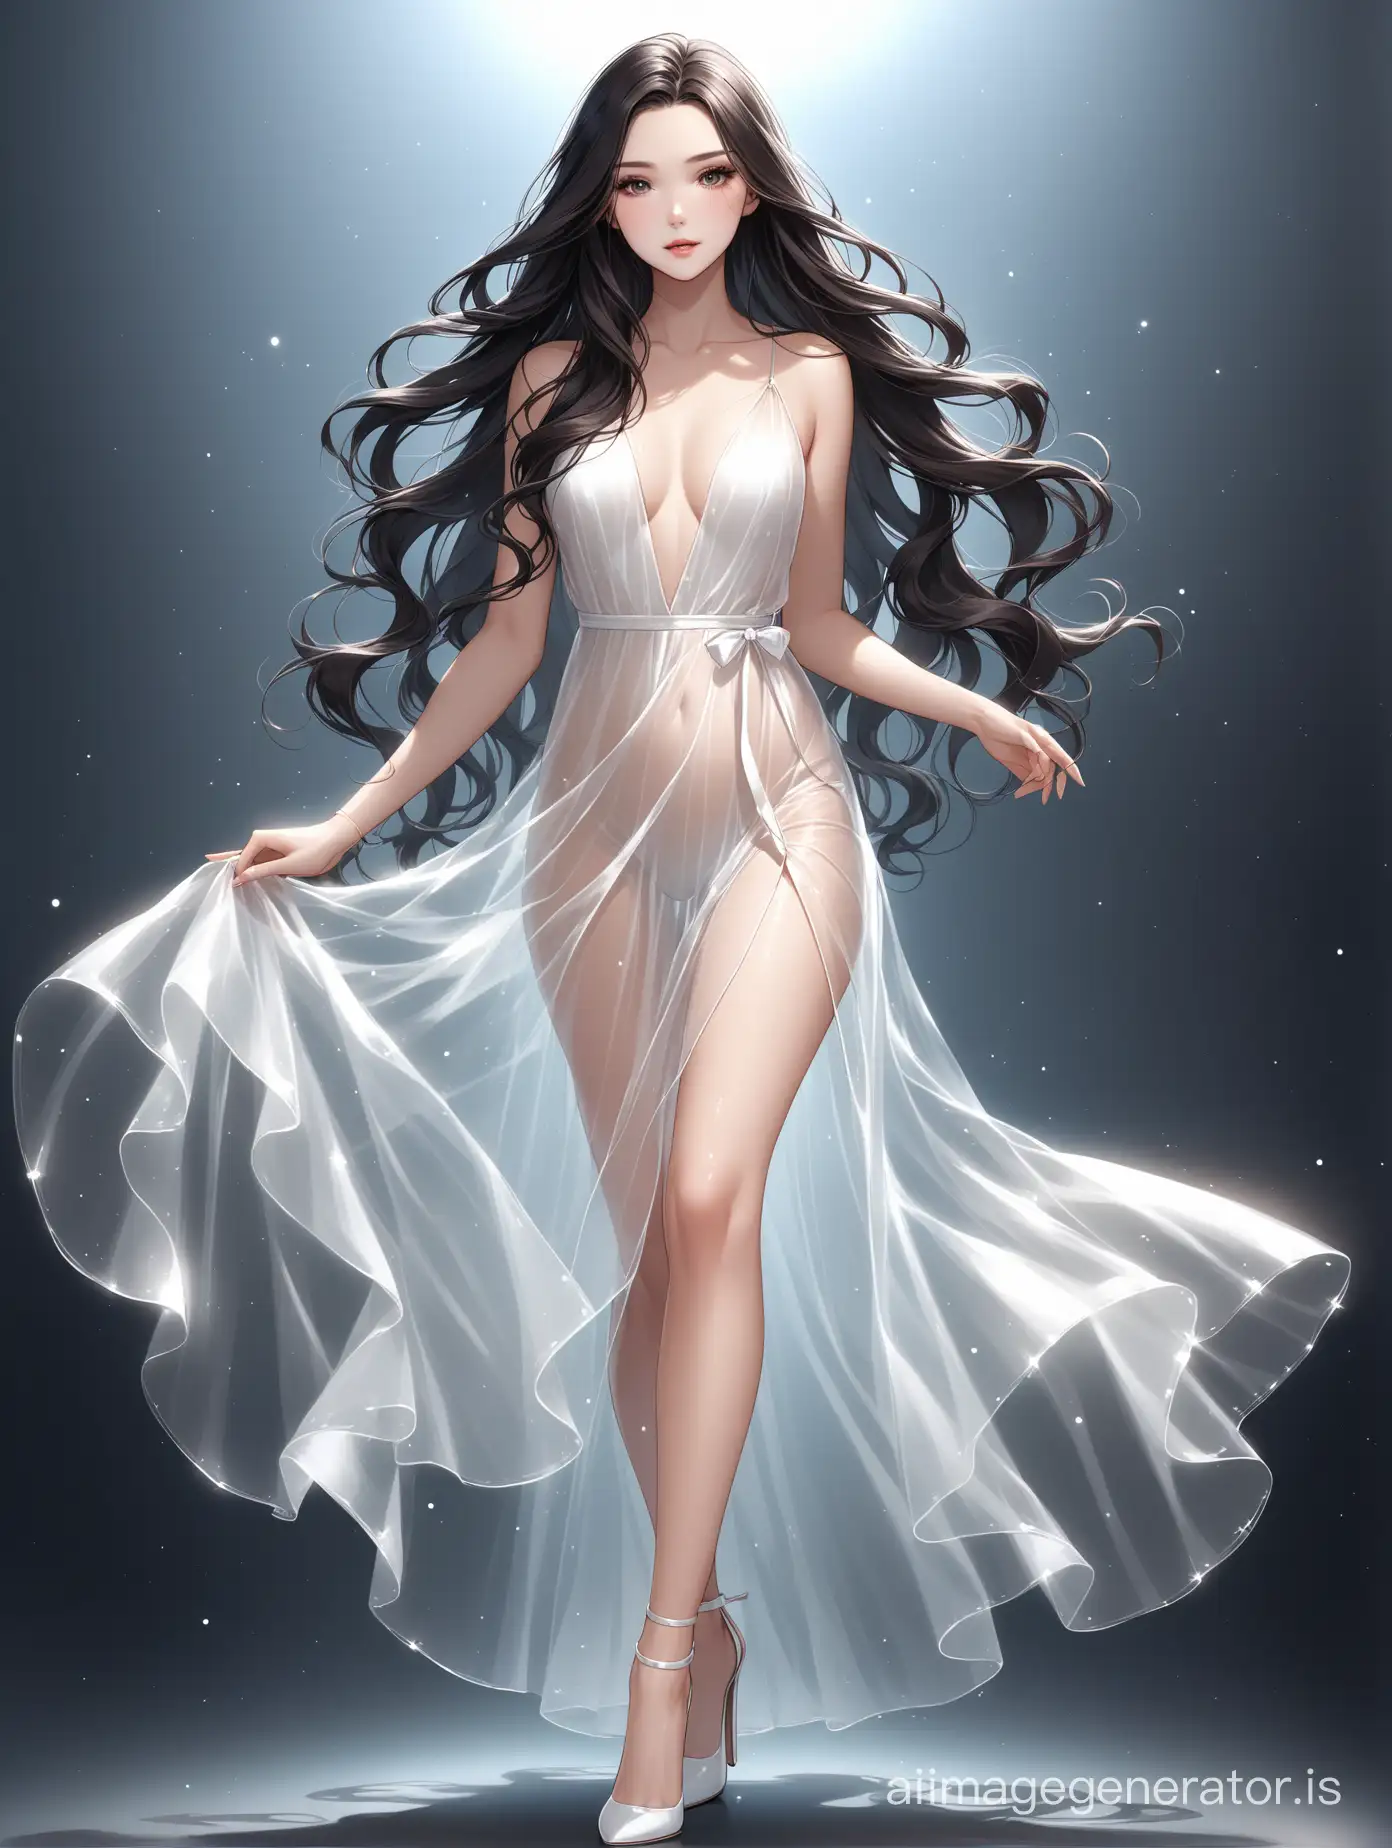 Ethereal-Woman-with-Flowing-Dark-Hair-in-Sheer-White-Dress-and-Heels